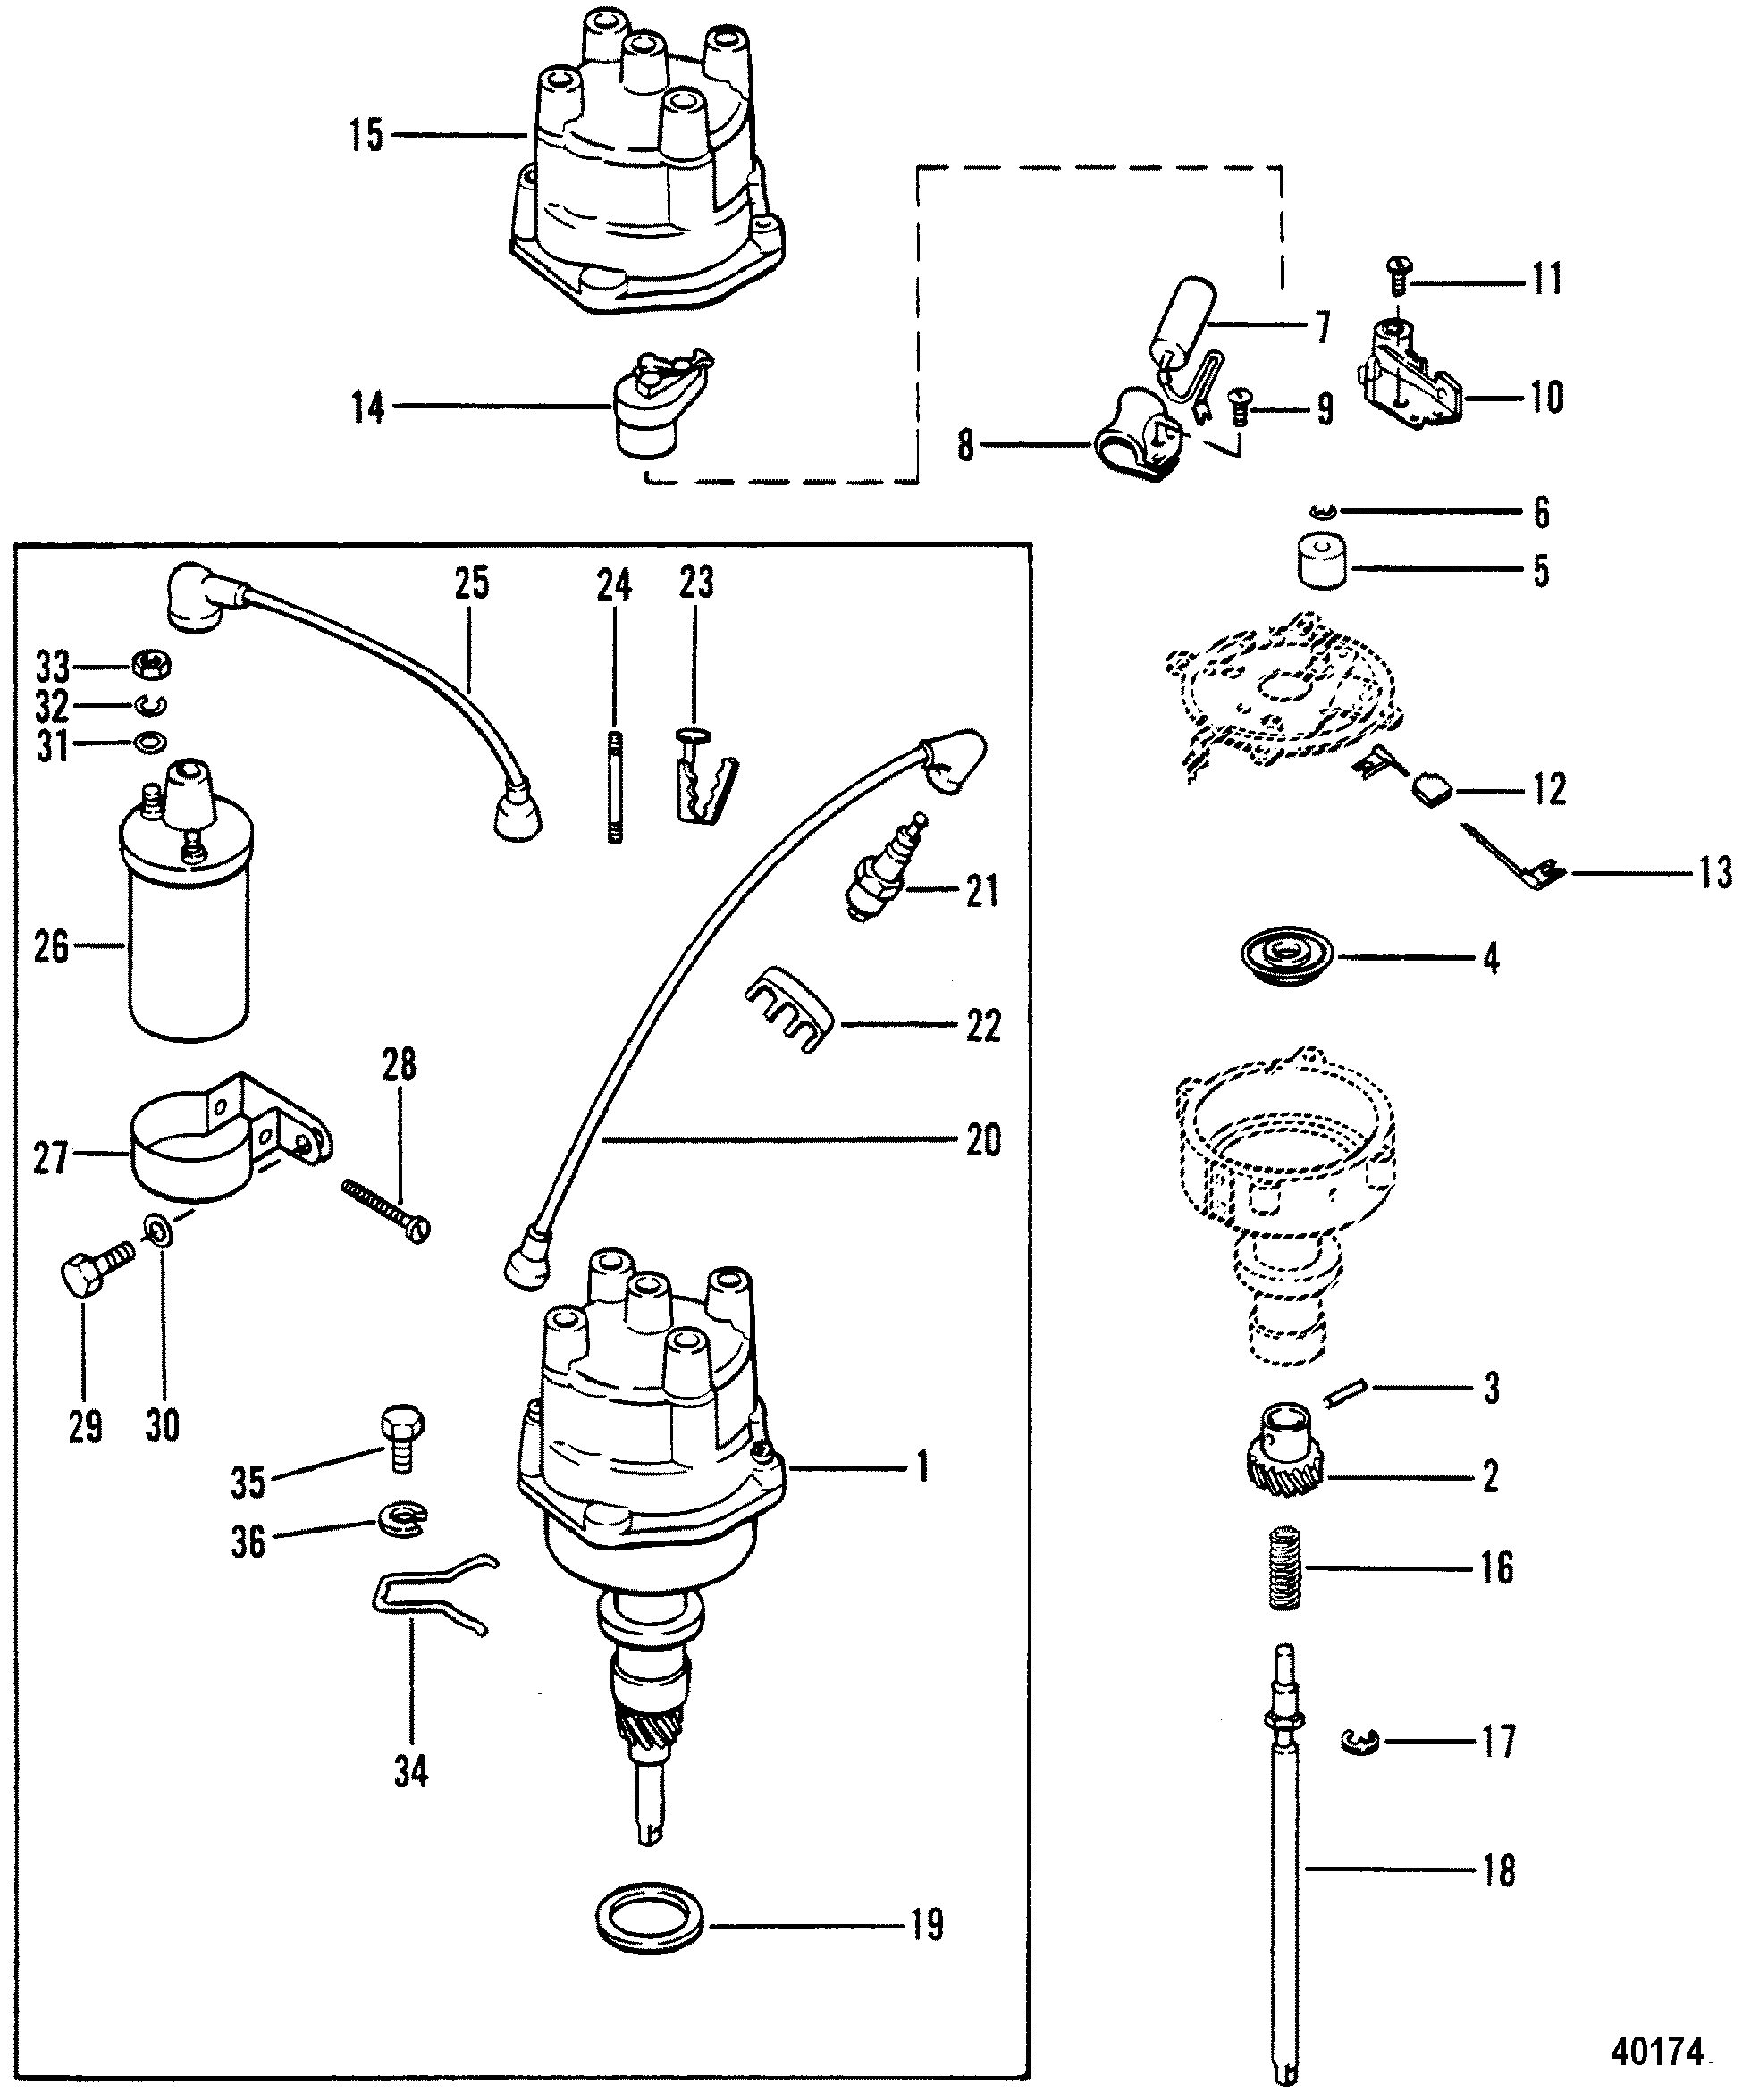 DISTRIBUTOR AND COIL